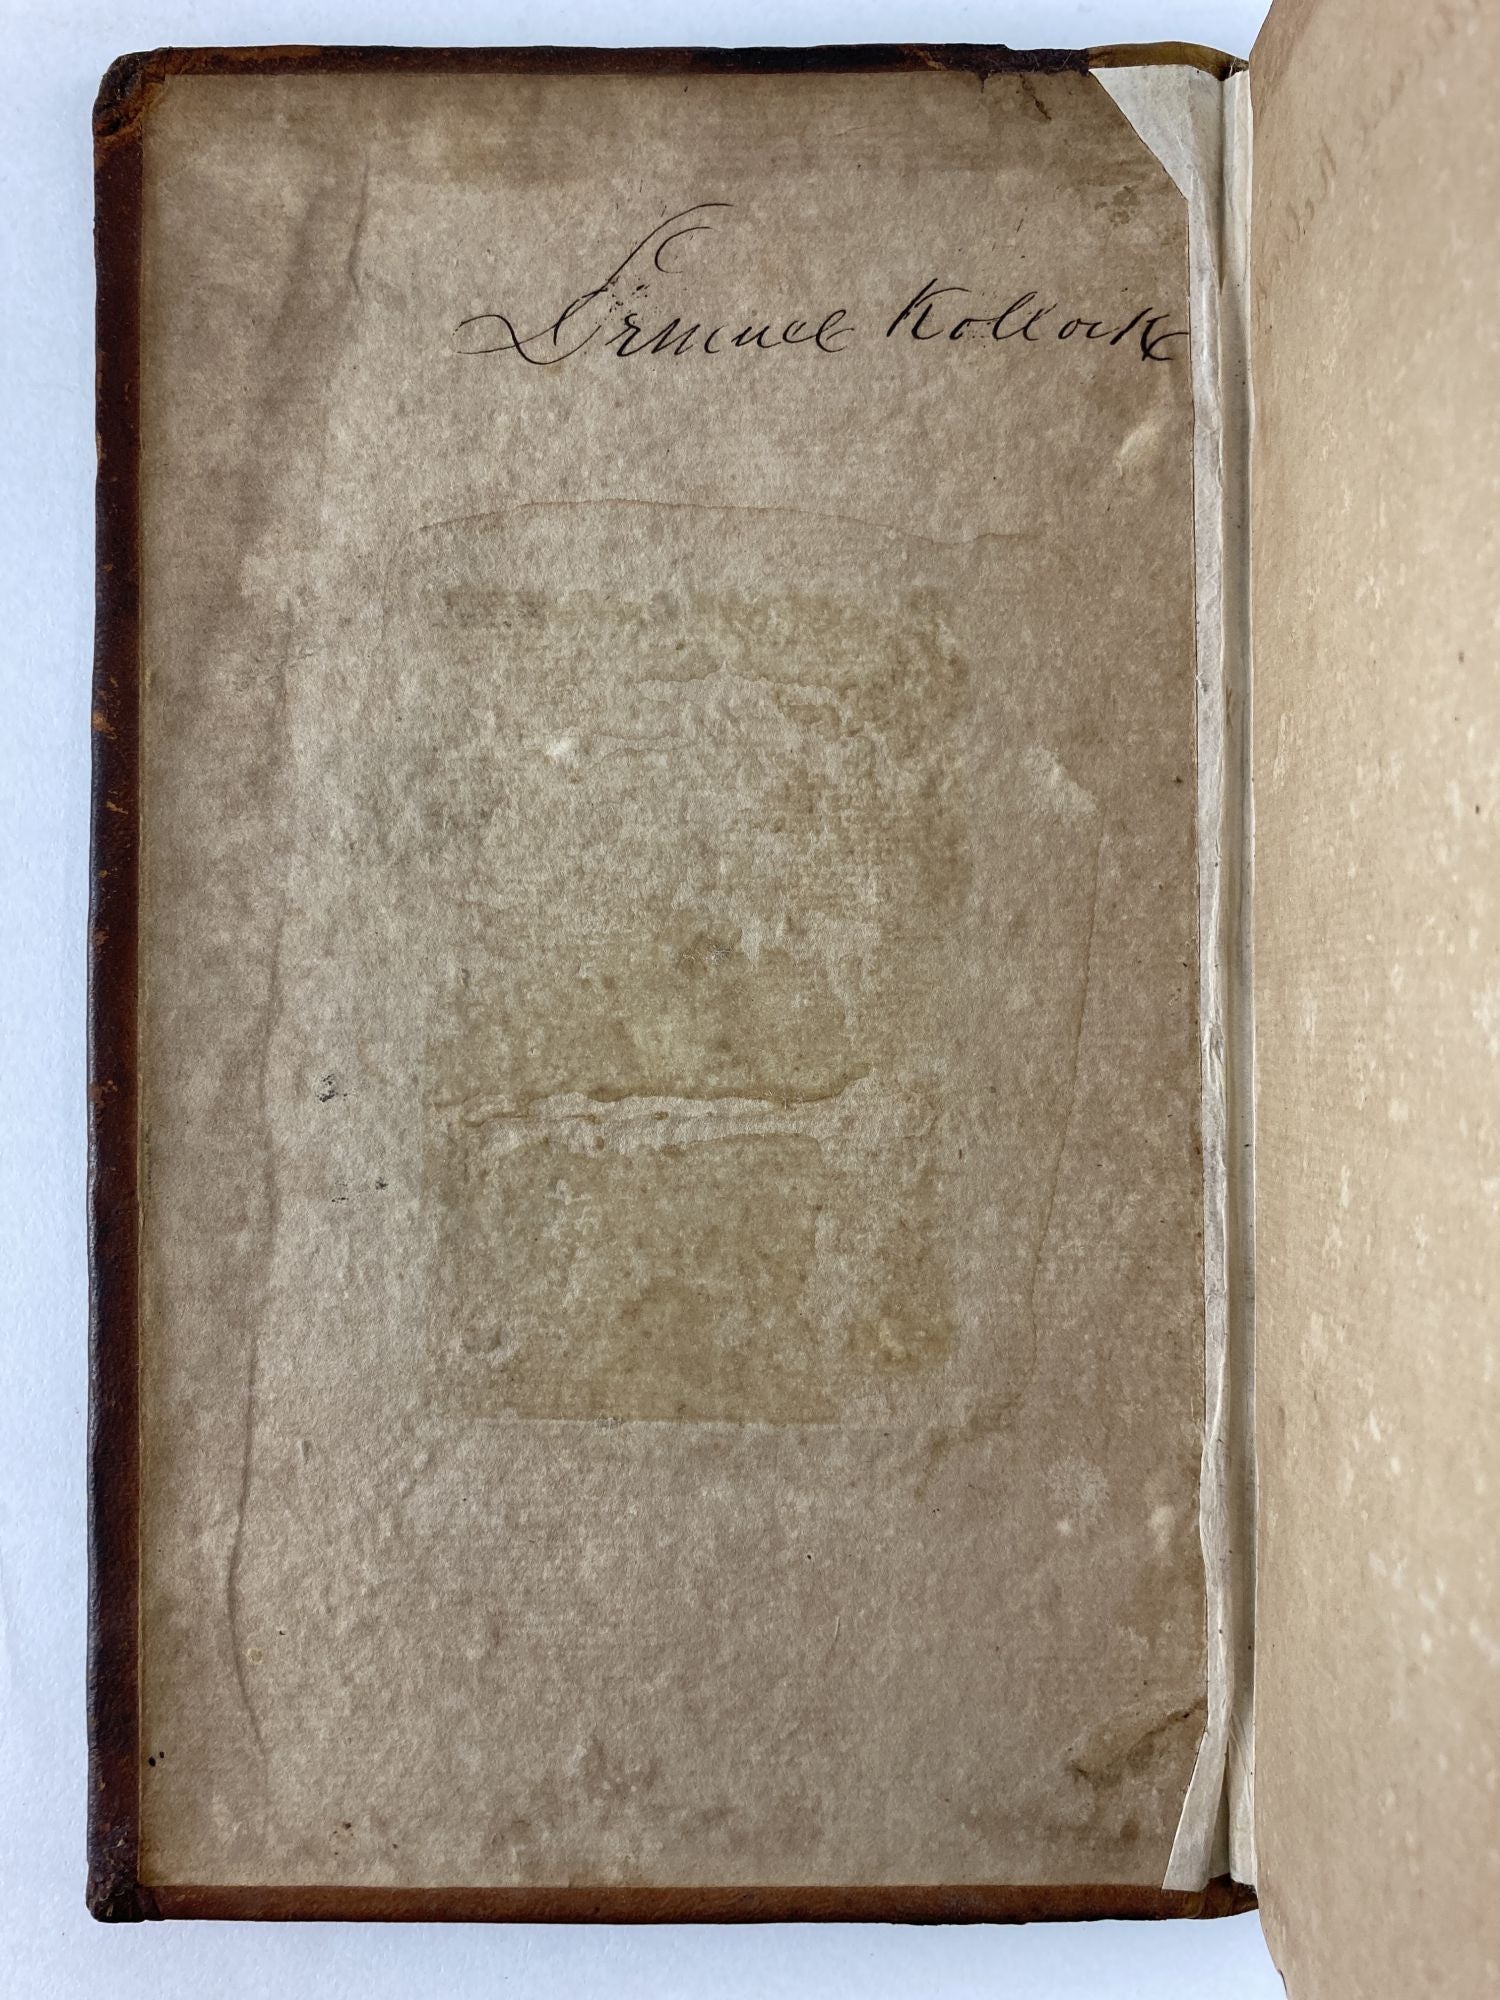 Product Image for MEDICAL INQUIRIES AND OBSERVATIONS: CONTAINING AN ACCOUNT OF THE BILIOUS REMITTING AND INTERMITTING YELLOW FEVER, AS IT APPEARED IN PHILADELPHIA IN THE YEAR 1794. TOGETHER WITH AN INQUIRY INTO THE PROXIMATE CAUSE OF FEVER; AND A DEFENCE OF BLOOD-LETTING A